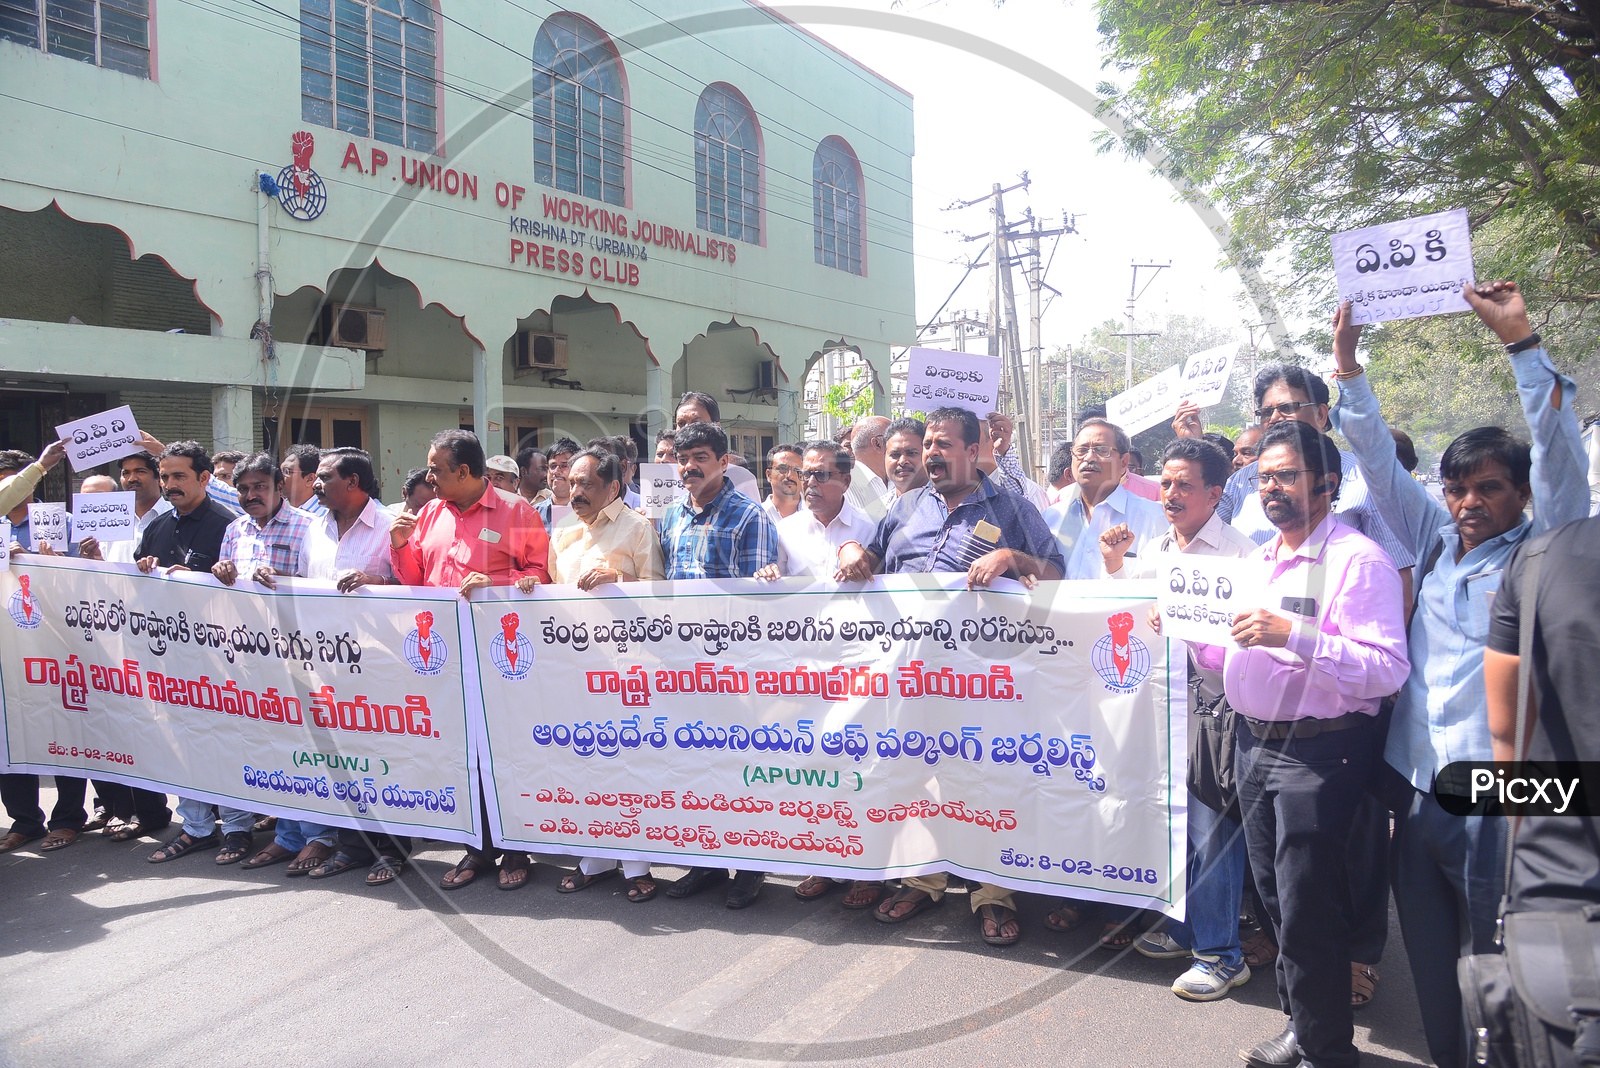 State Bandh: Protests in Vijayawada at AP Union working journalists press club